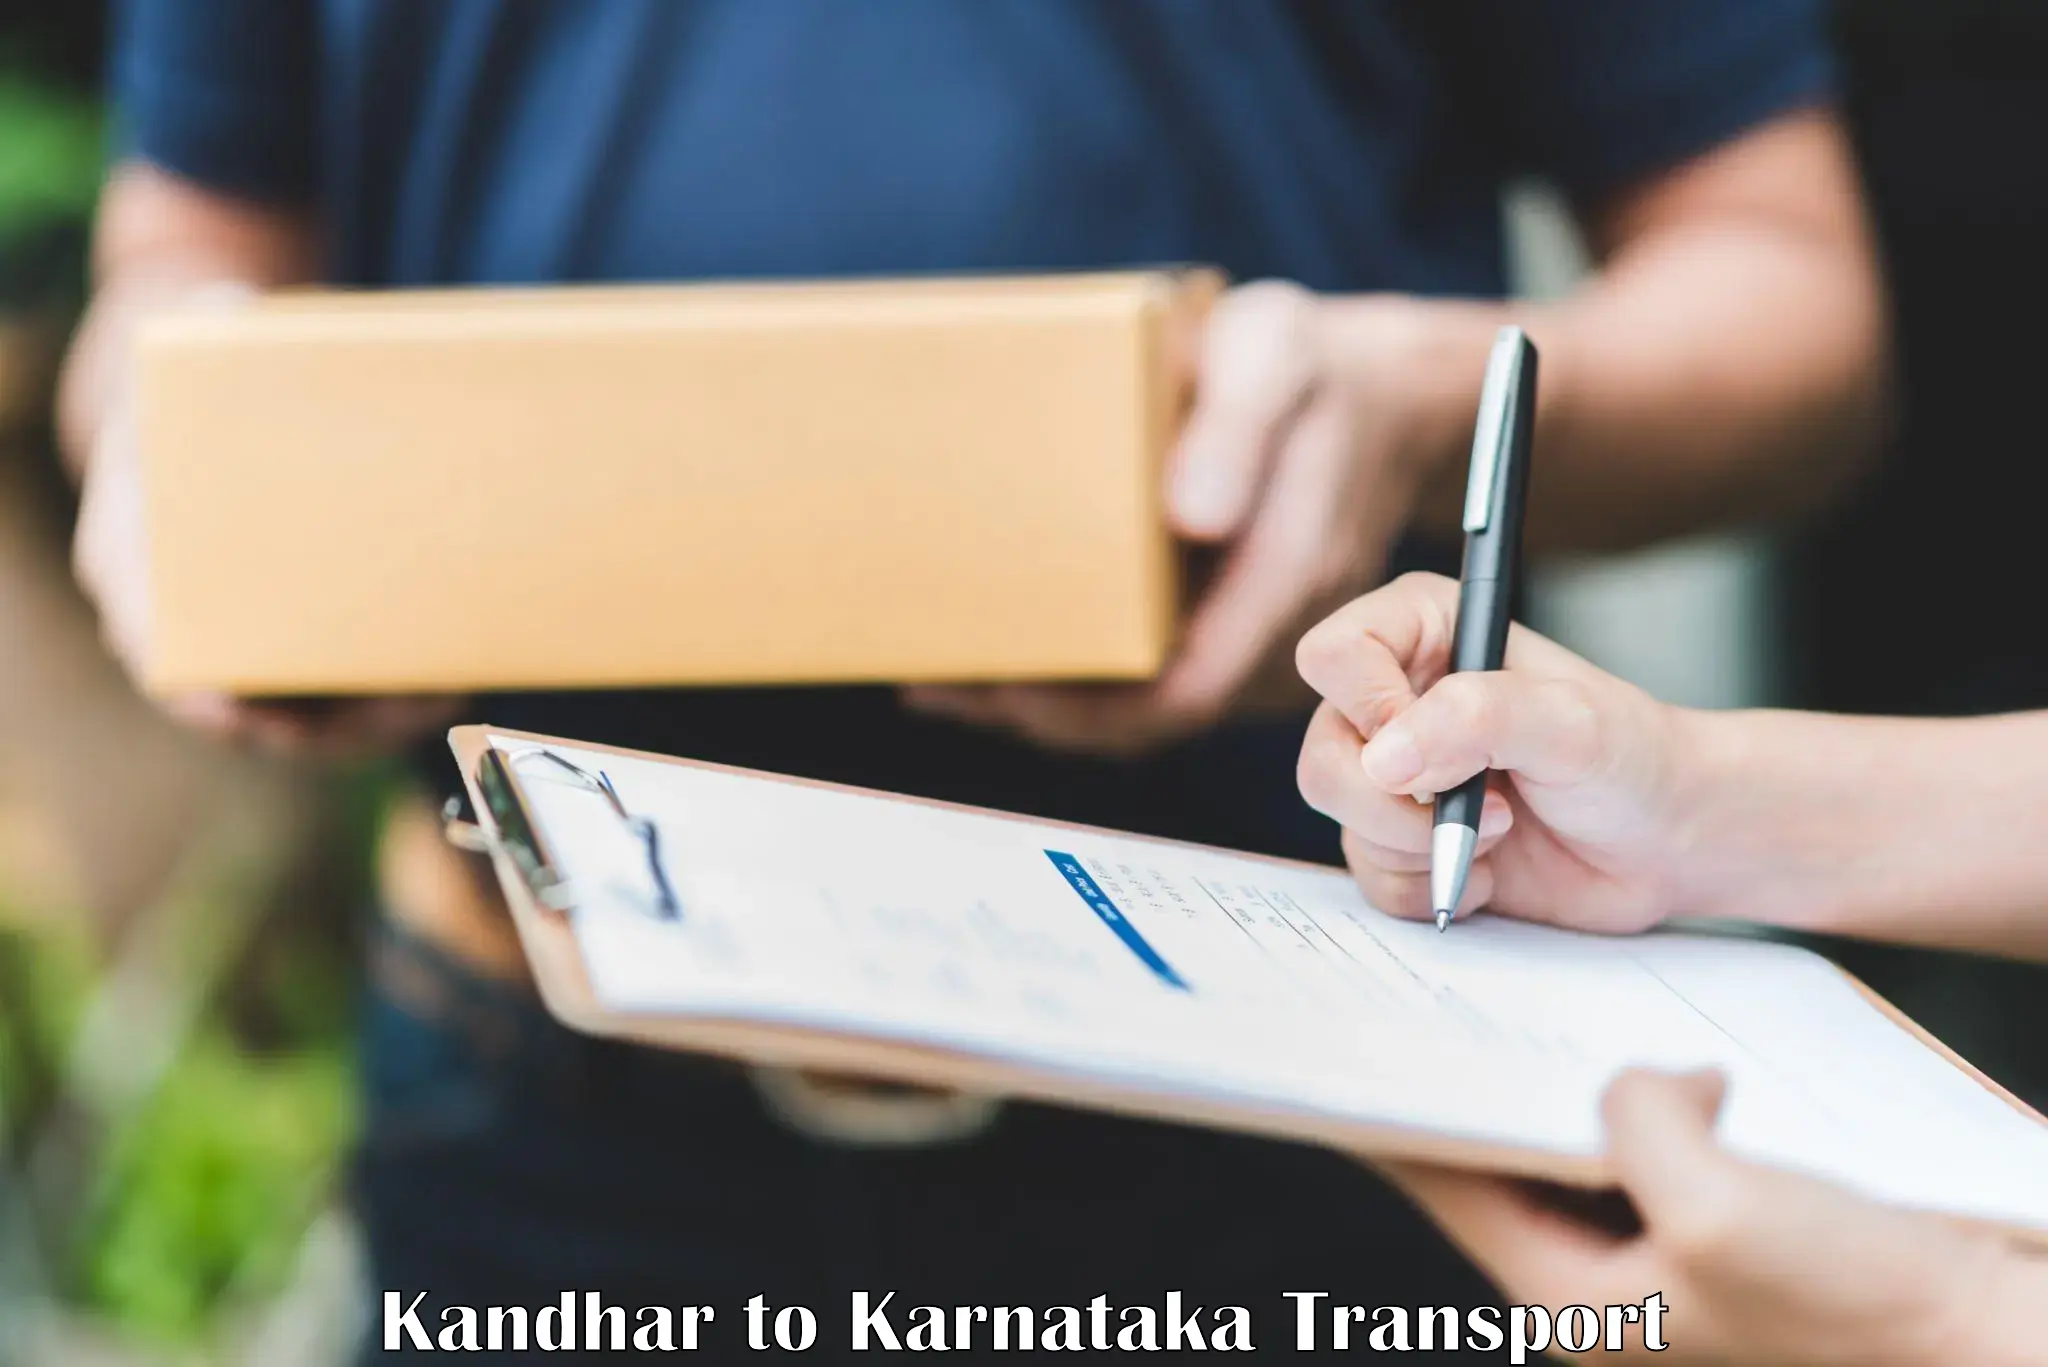 Container transport service Kandhar to Davangere